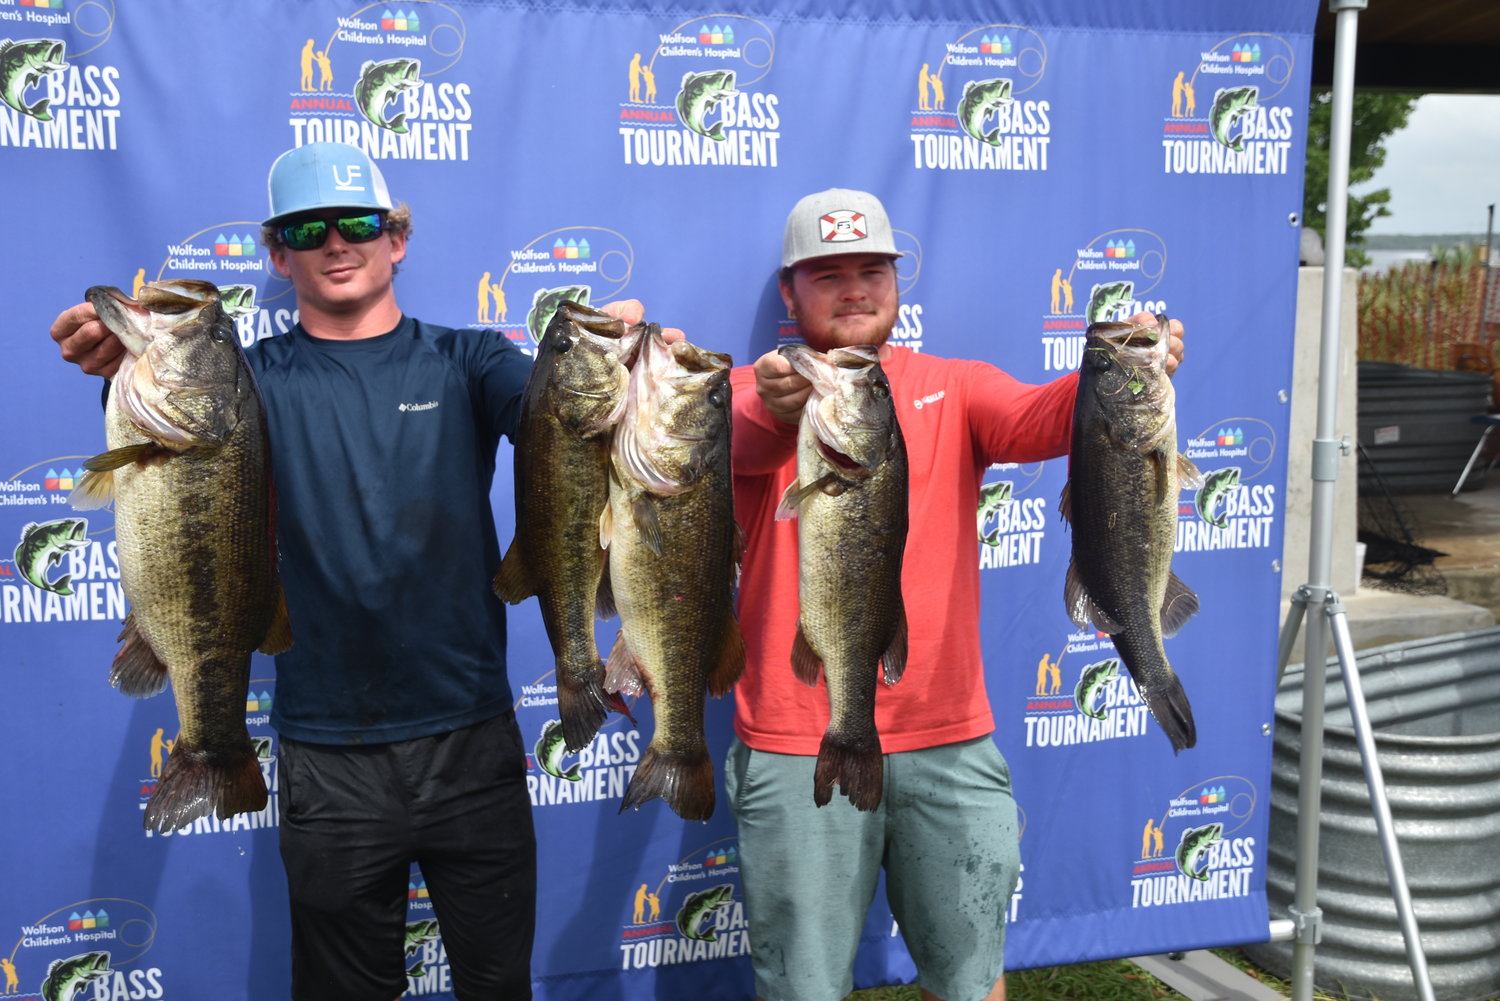 Wyatt Kinney of Bunnell and Austin Black of East Palatka won first place in the Wolfson Children’s Hospital Bass Tournament.